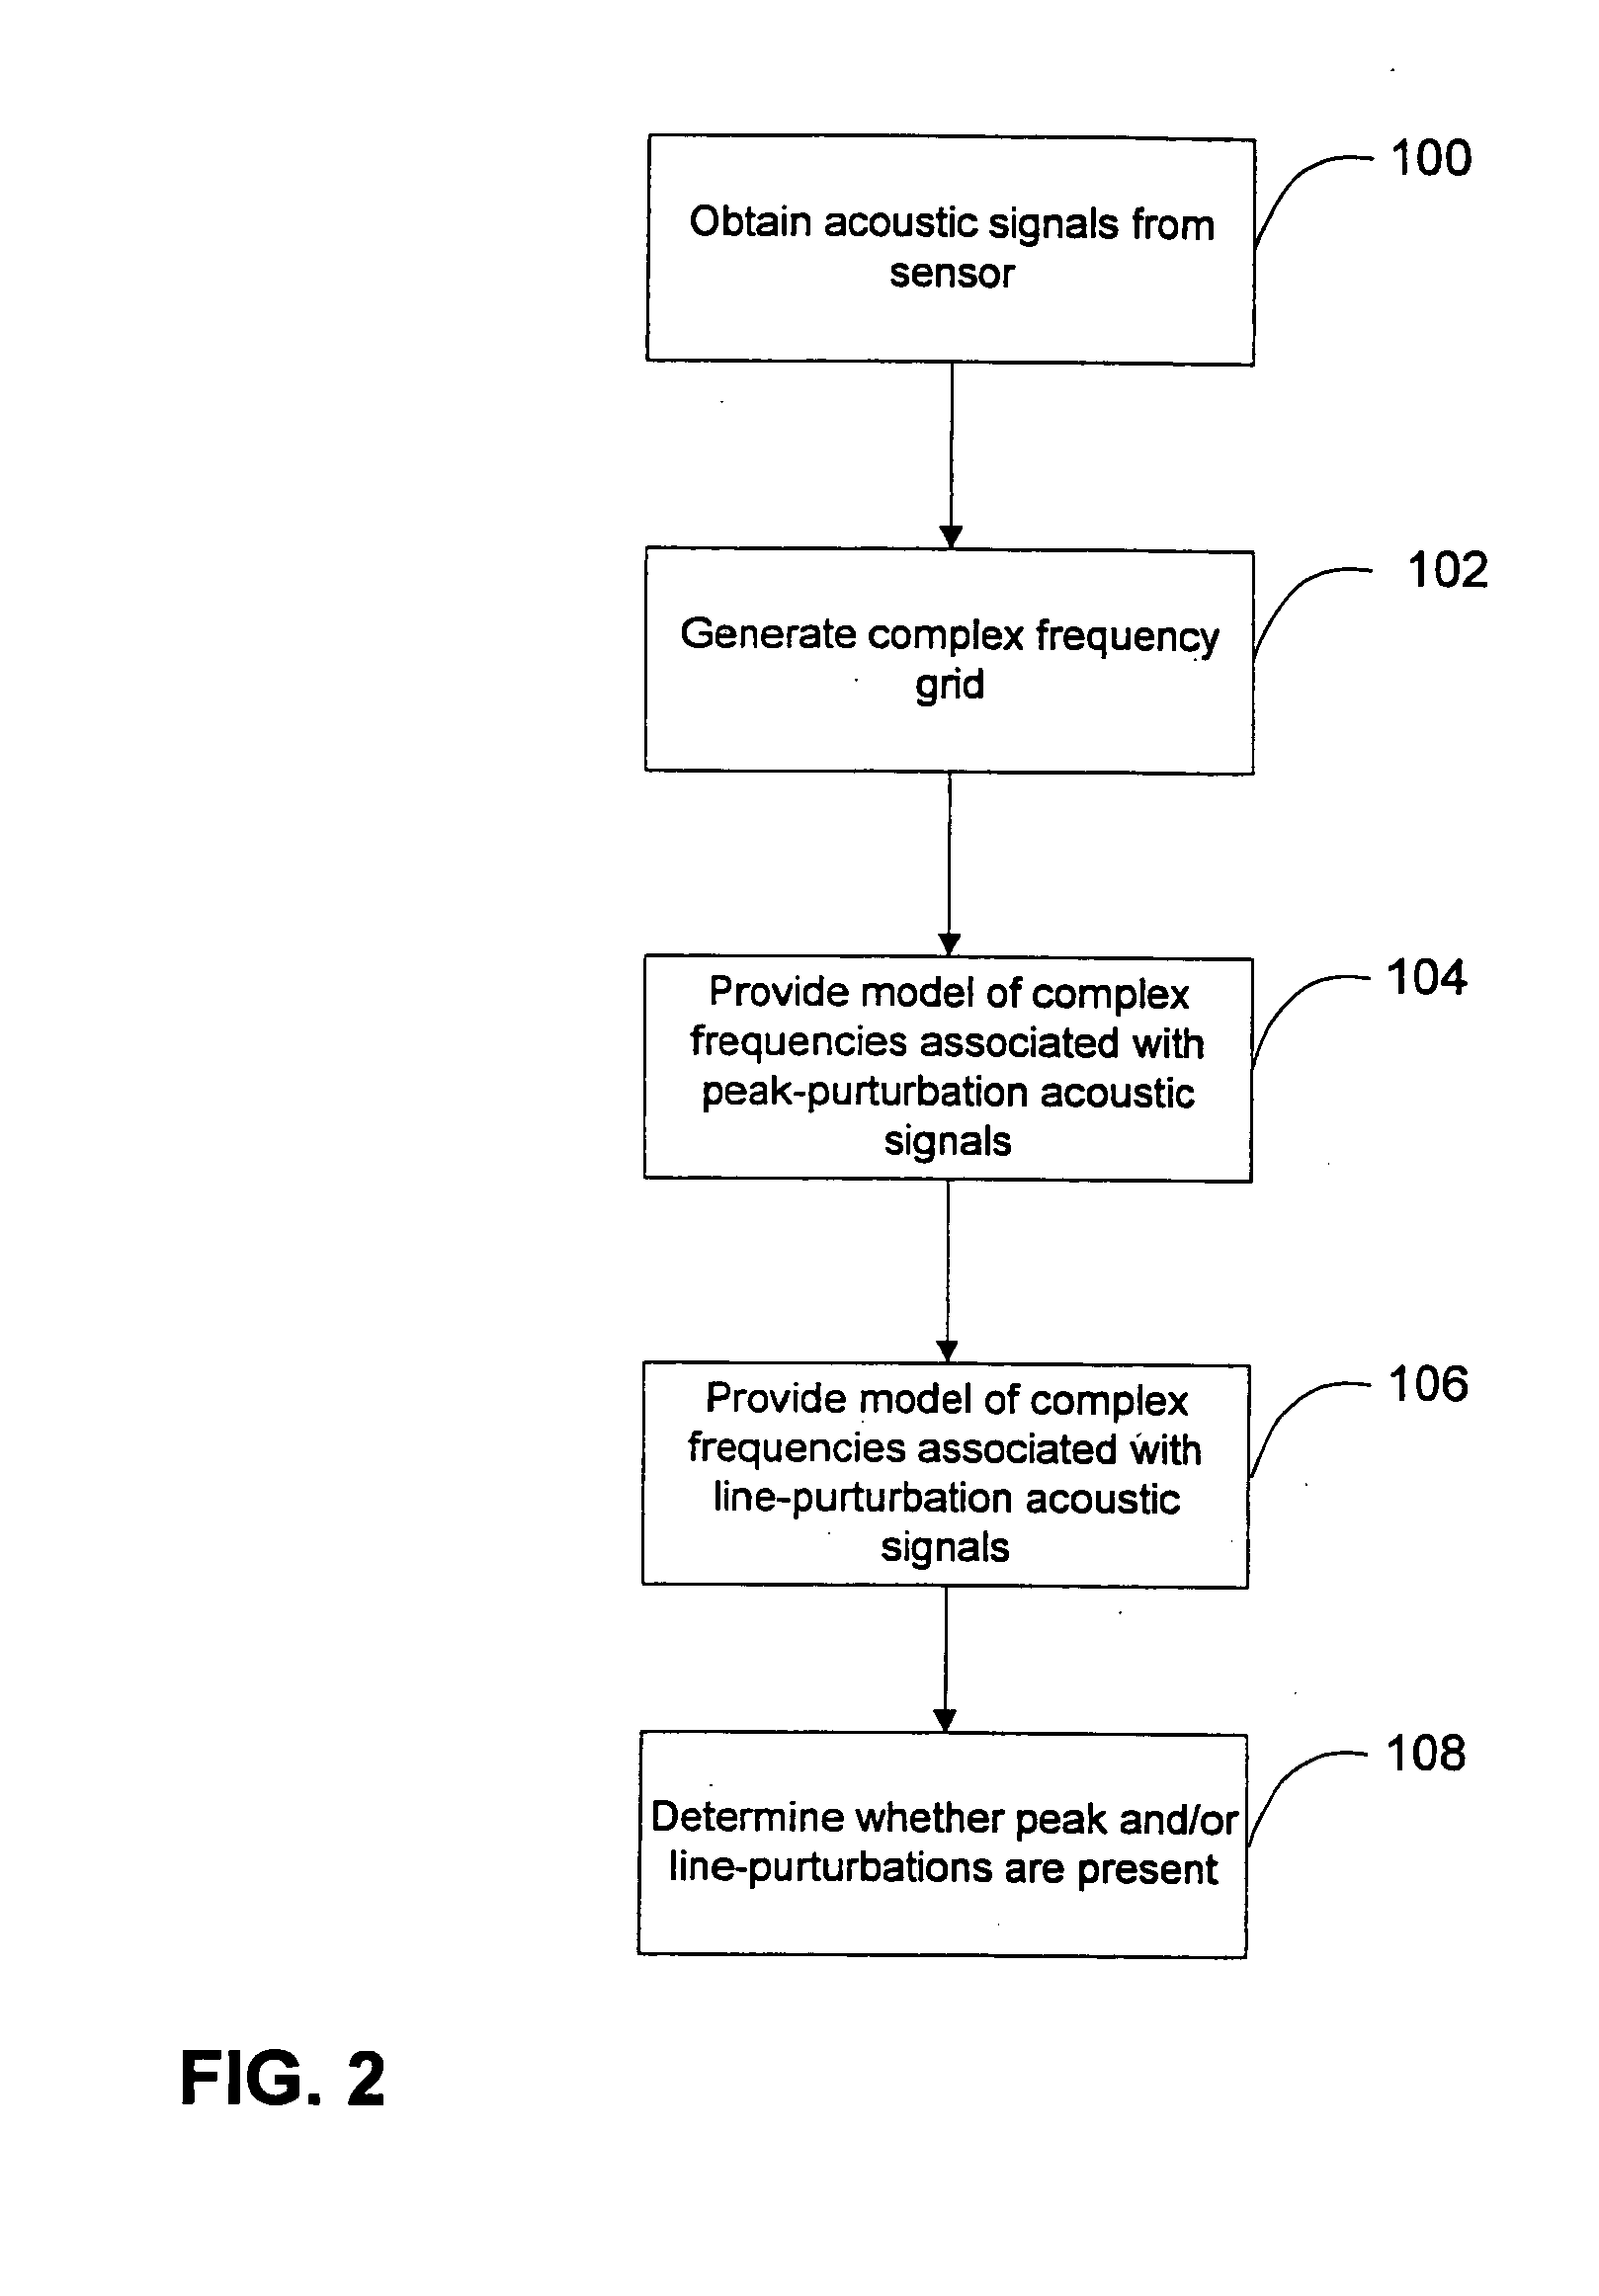 Methods, systems, and computer program products for analyzing cardiovascular sounds using eigen functions